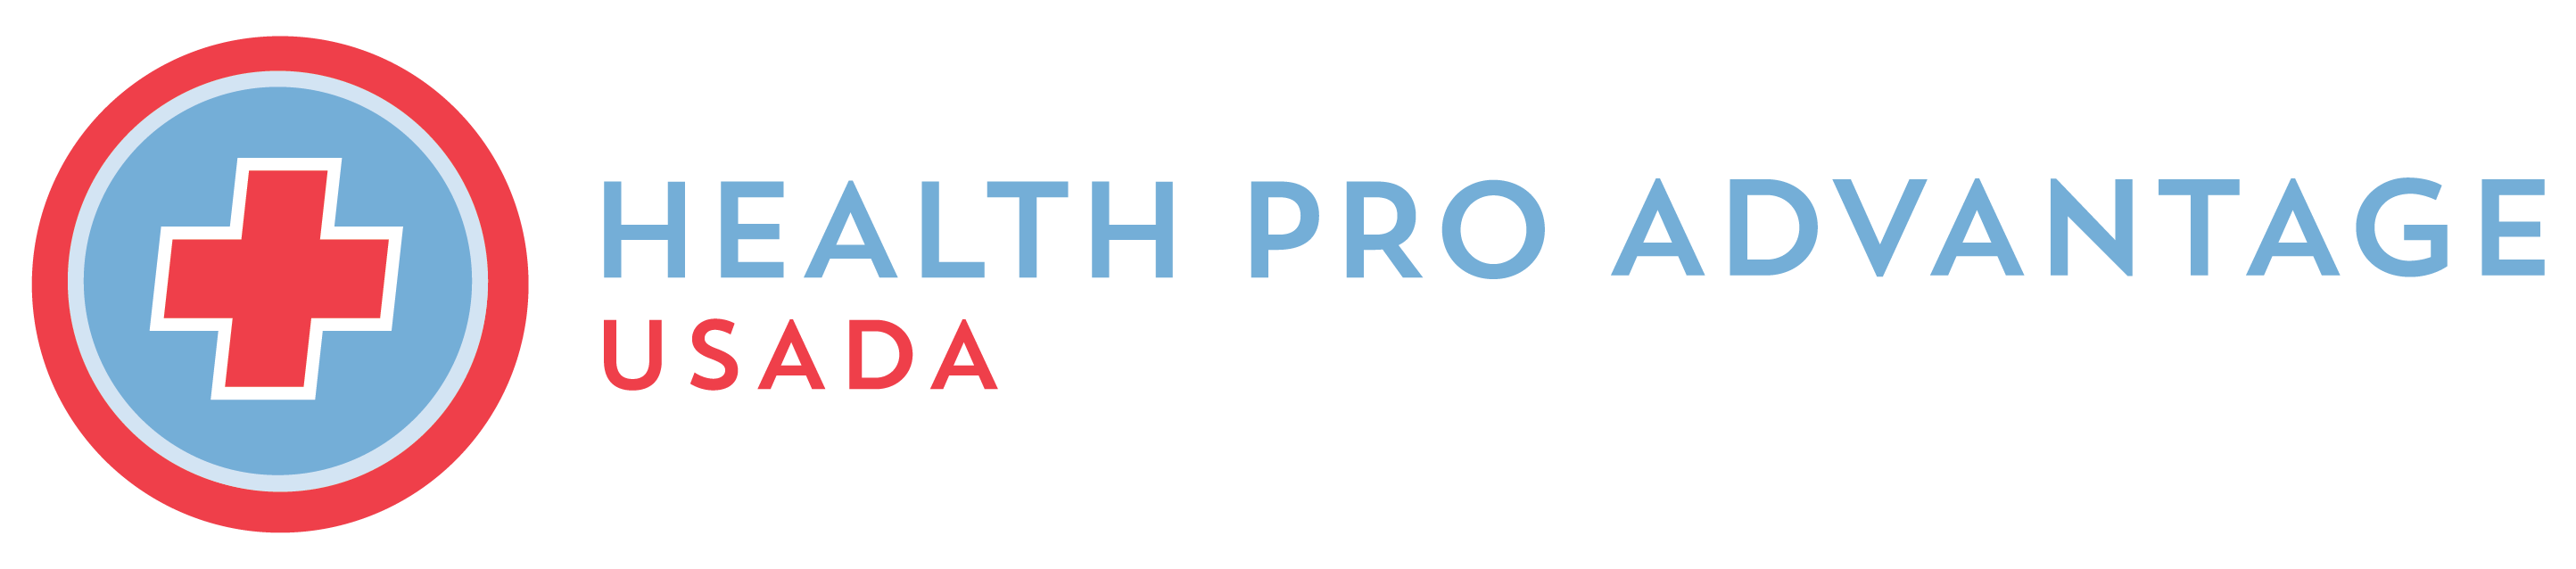 HealthPro Advantage: Anti-doping Education for the Health Professional Update Banner